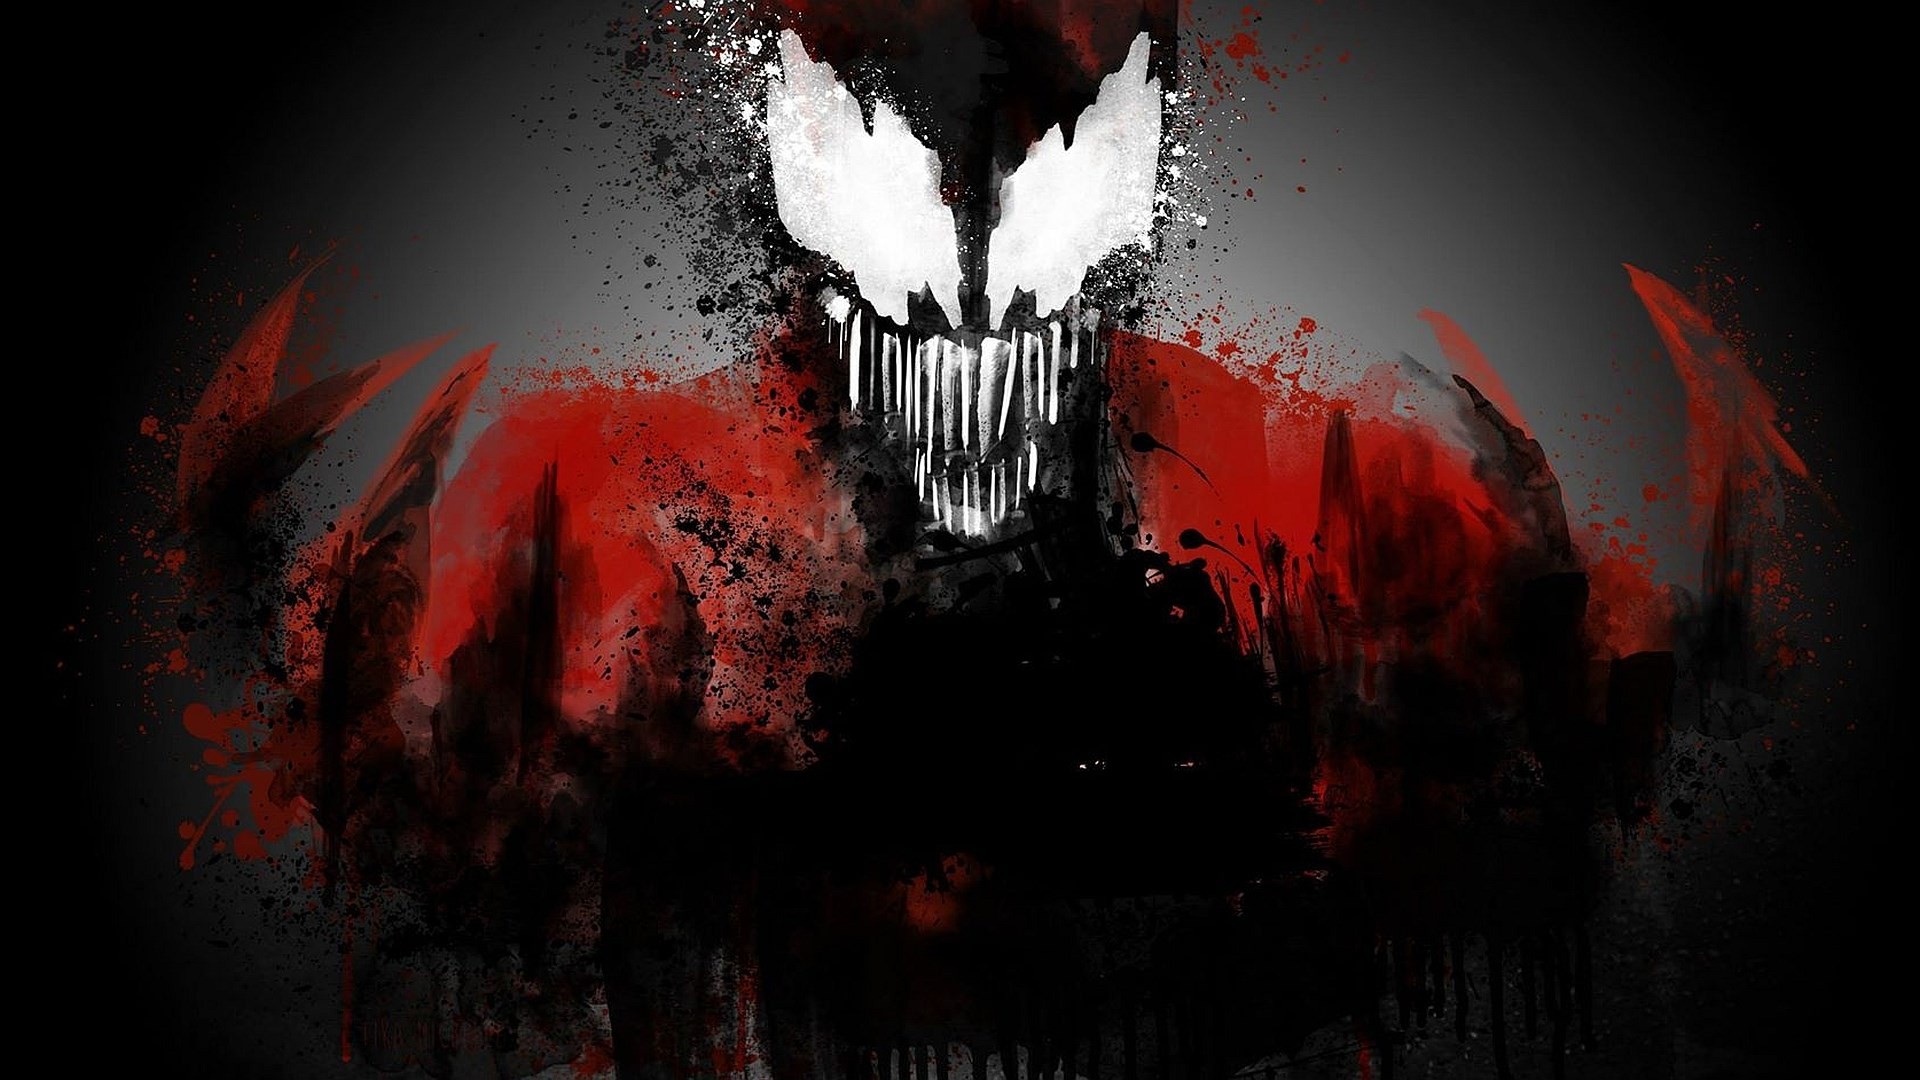 1920x1080 free screensaver wallpapers for carnage, 982 kB - Banks Ross